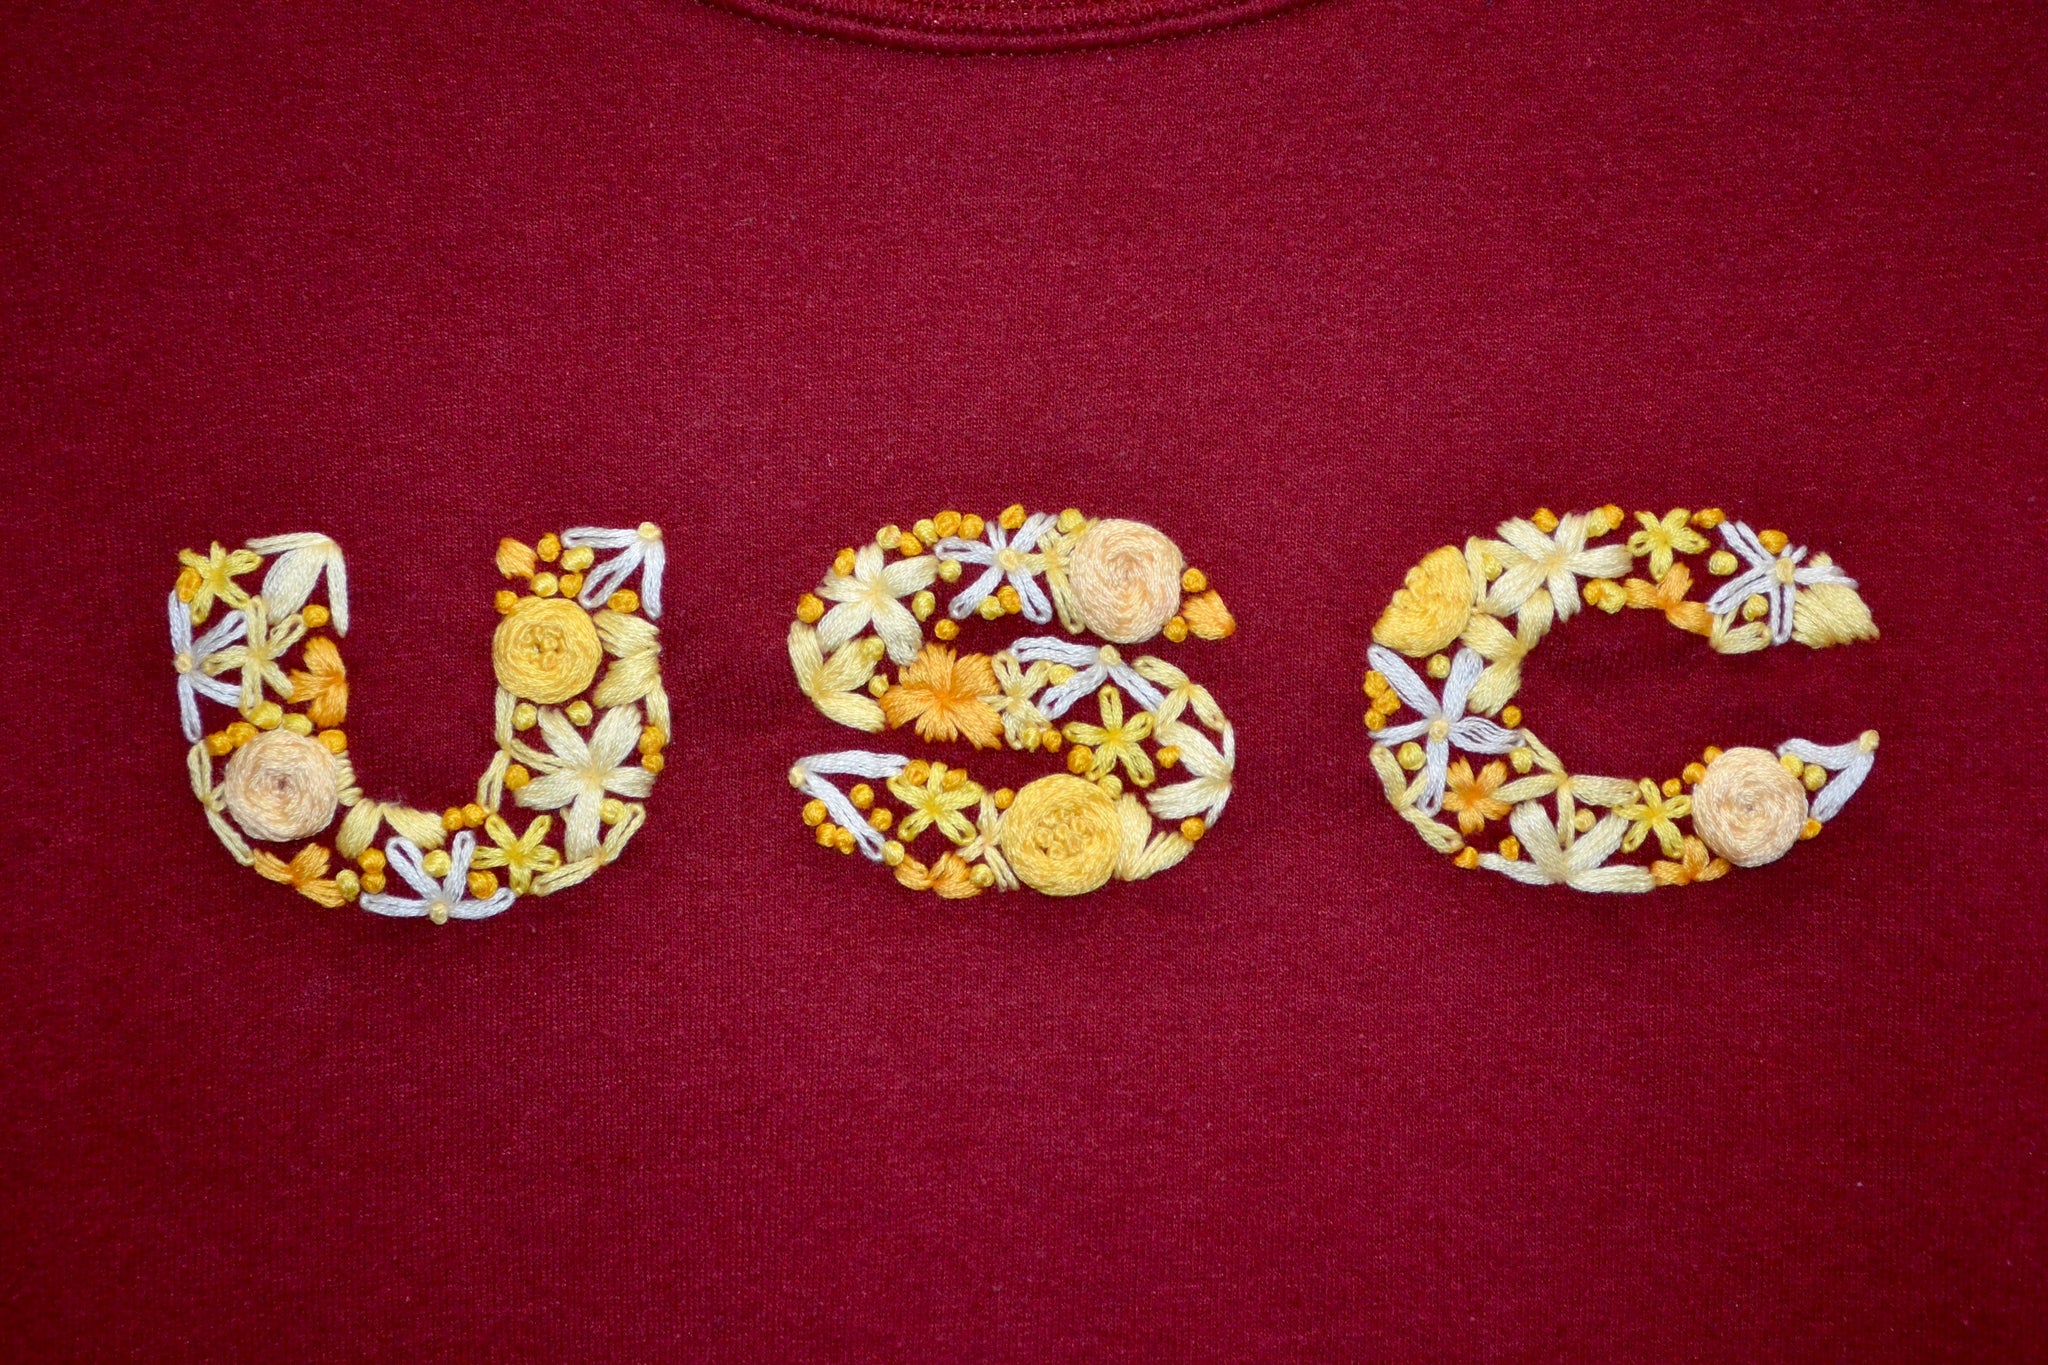 CUSTOMIZABLE Floral University Embroidered Crewneck/Hoodie